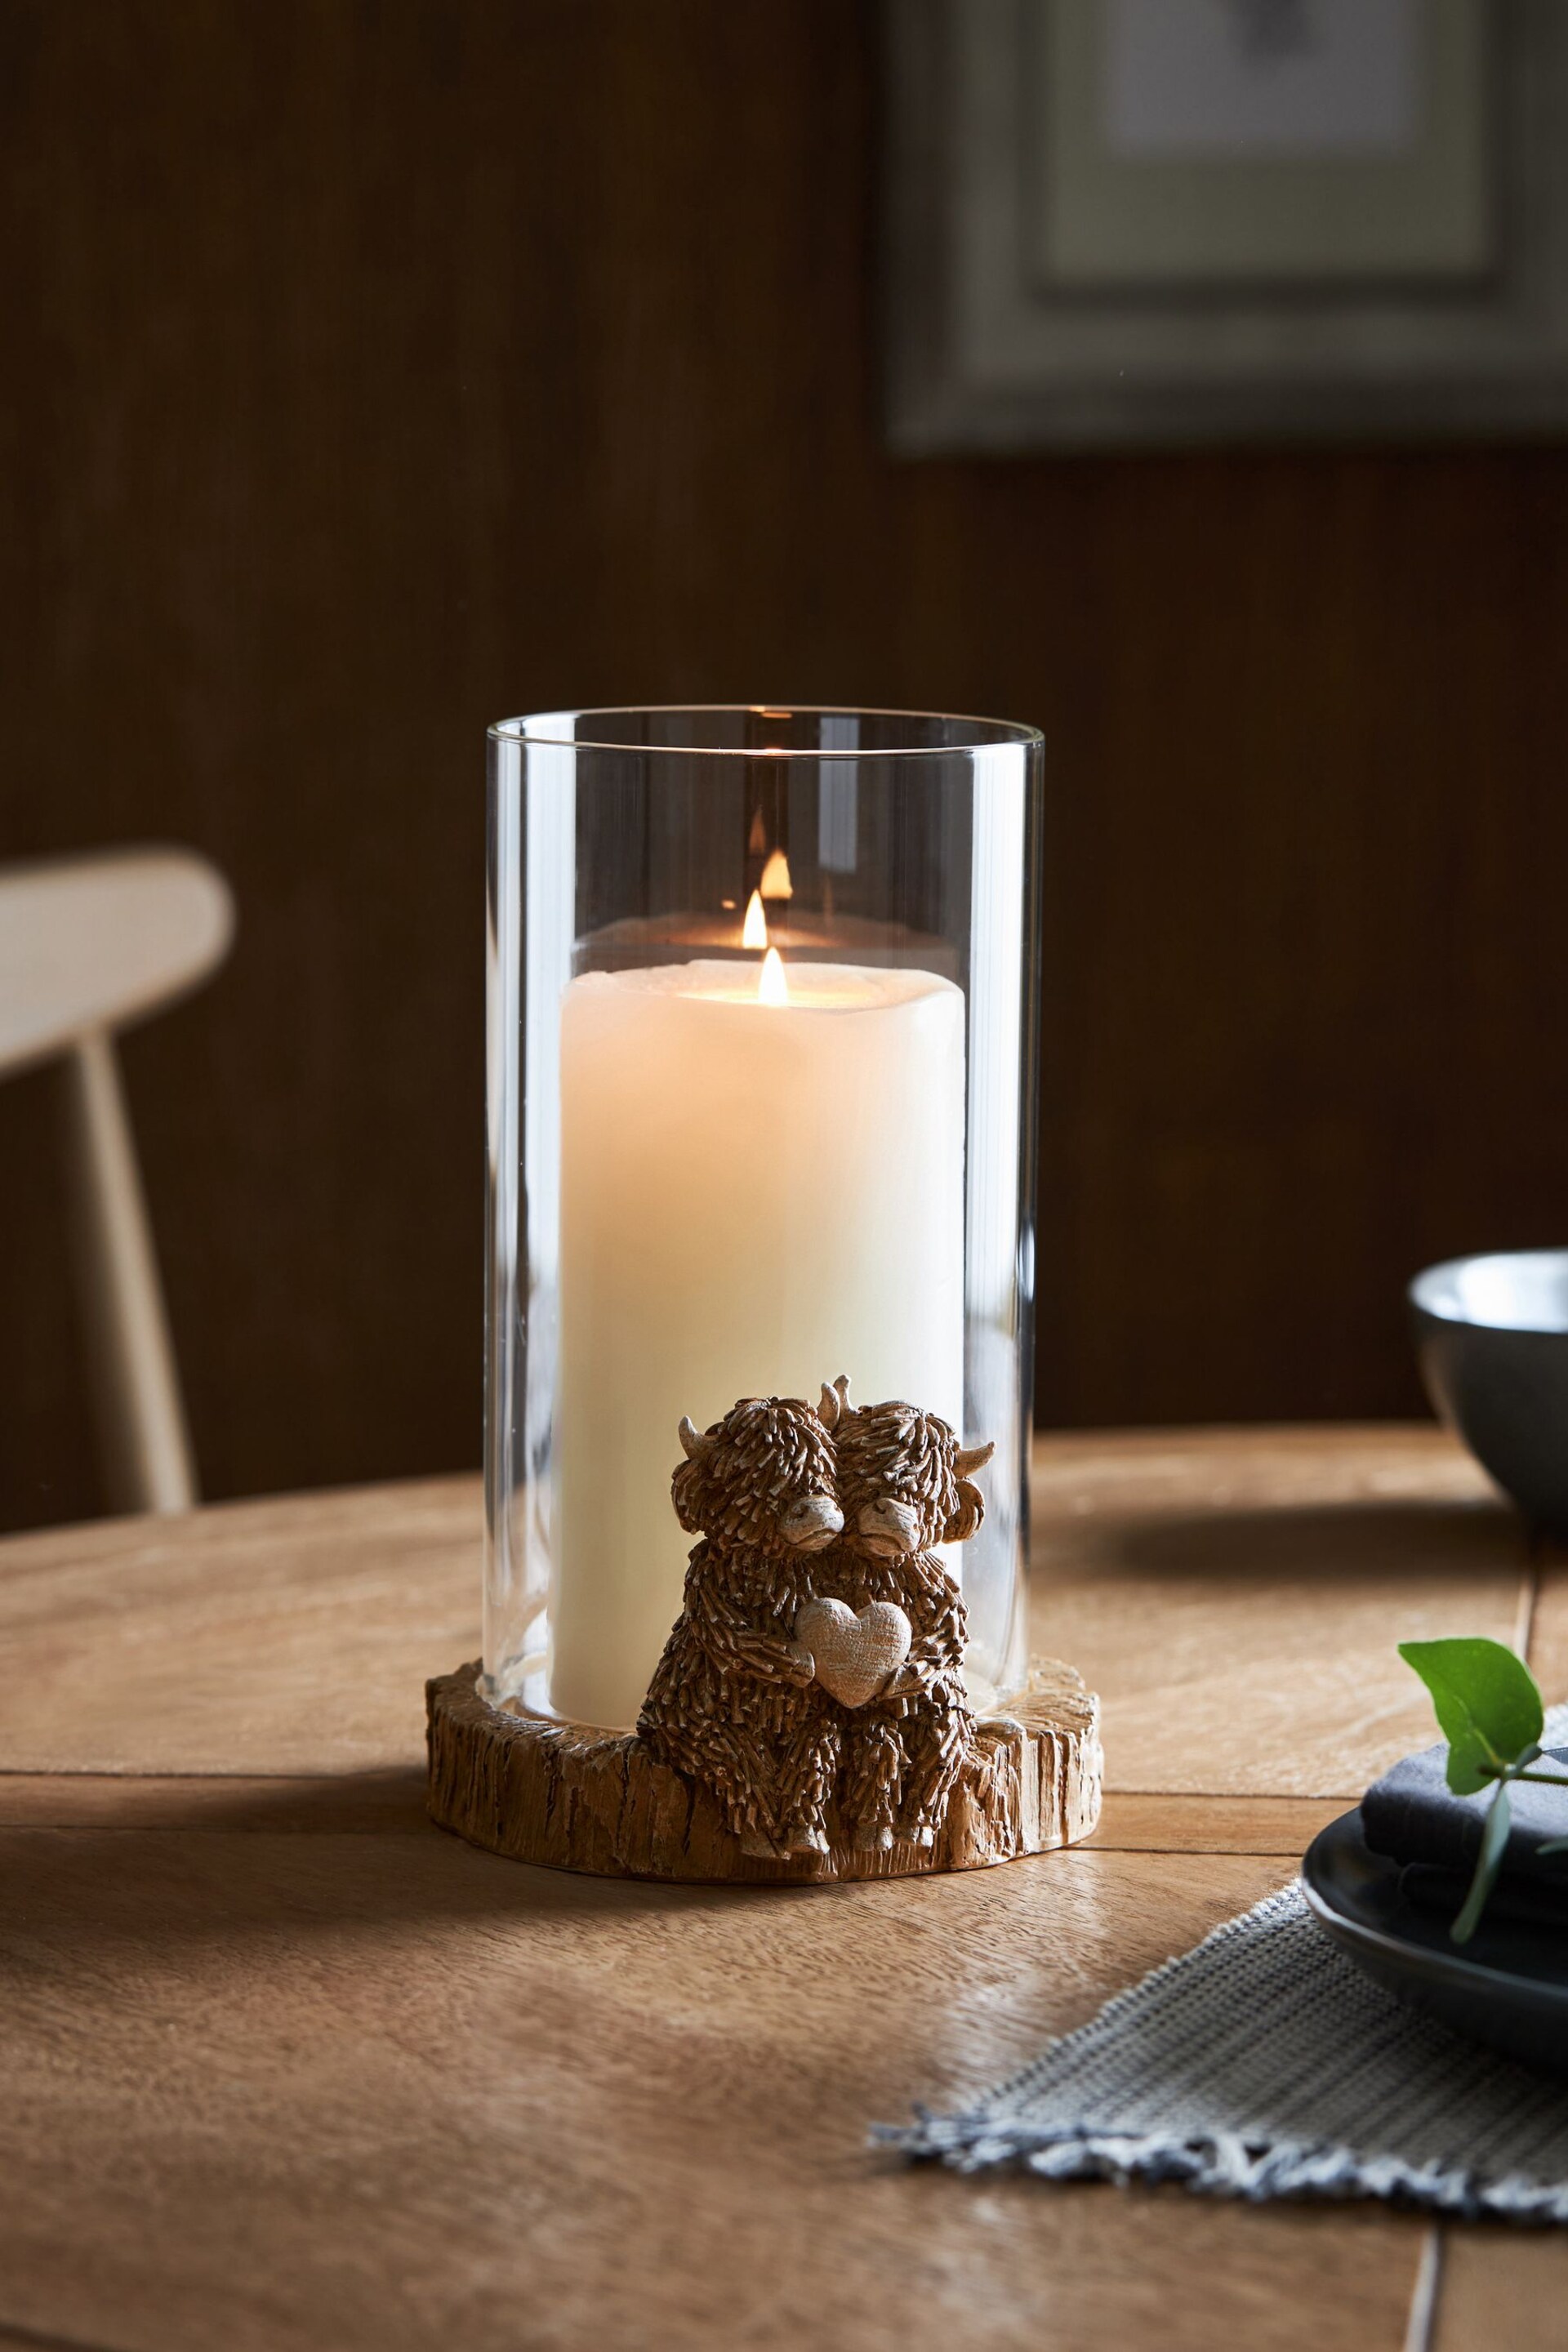 Natural Hamish The Highland Cow Hurricane Candle Holder - Image 1 of 5